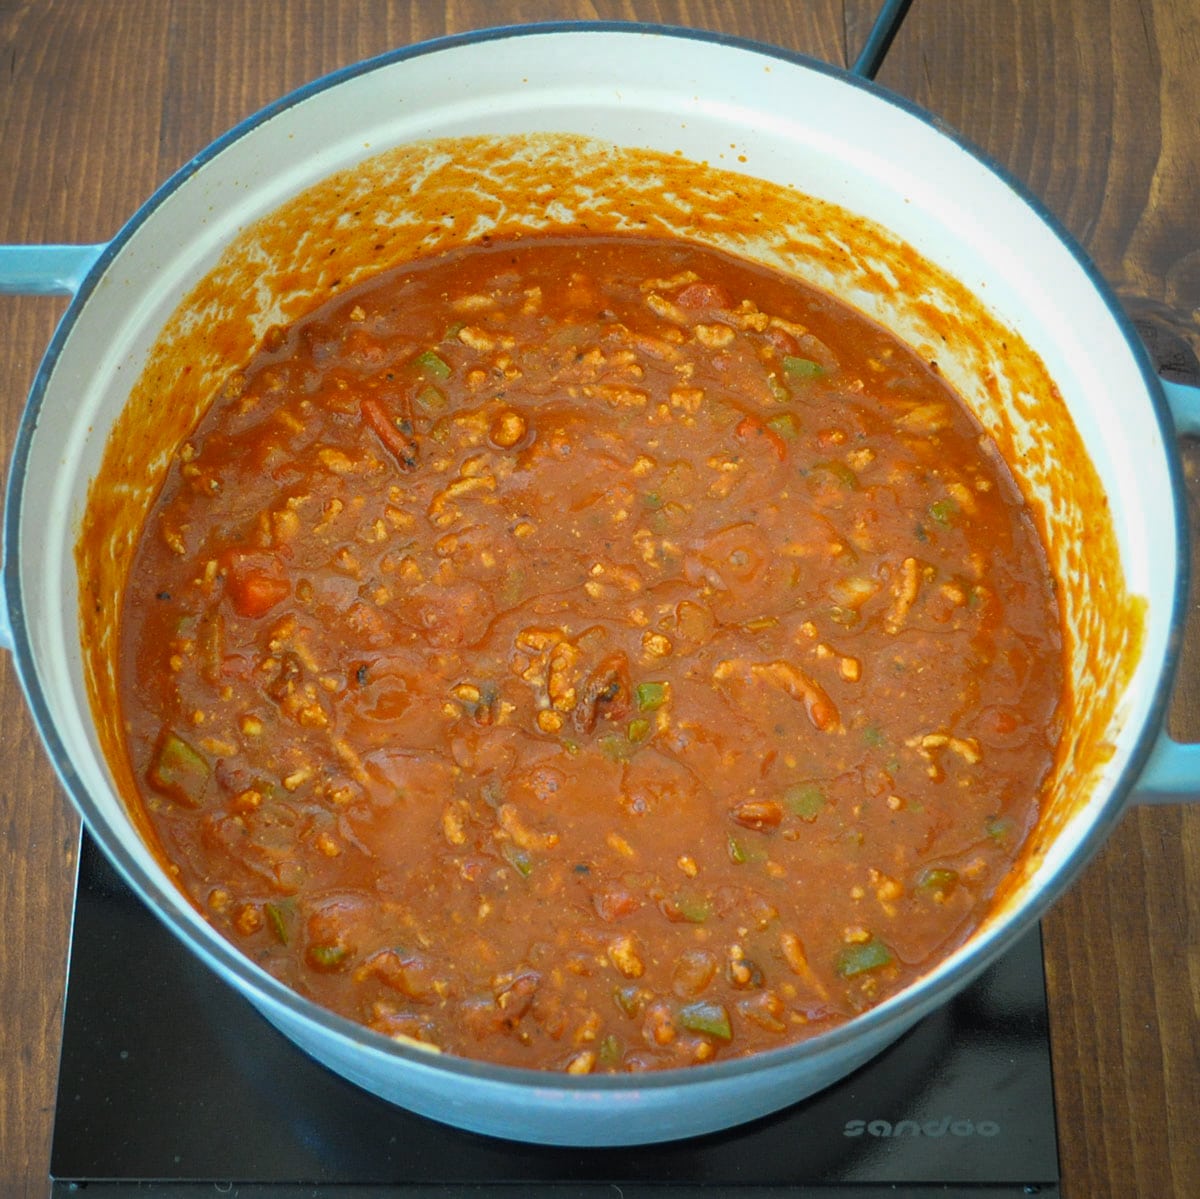 diced tomatoes and tomato sauce added to ground turkey chipotle chili in a large pot